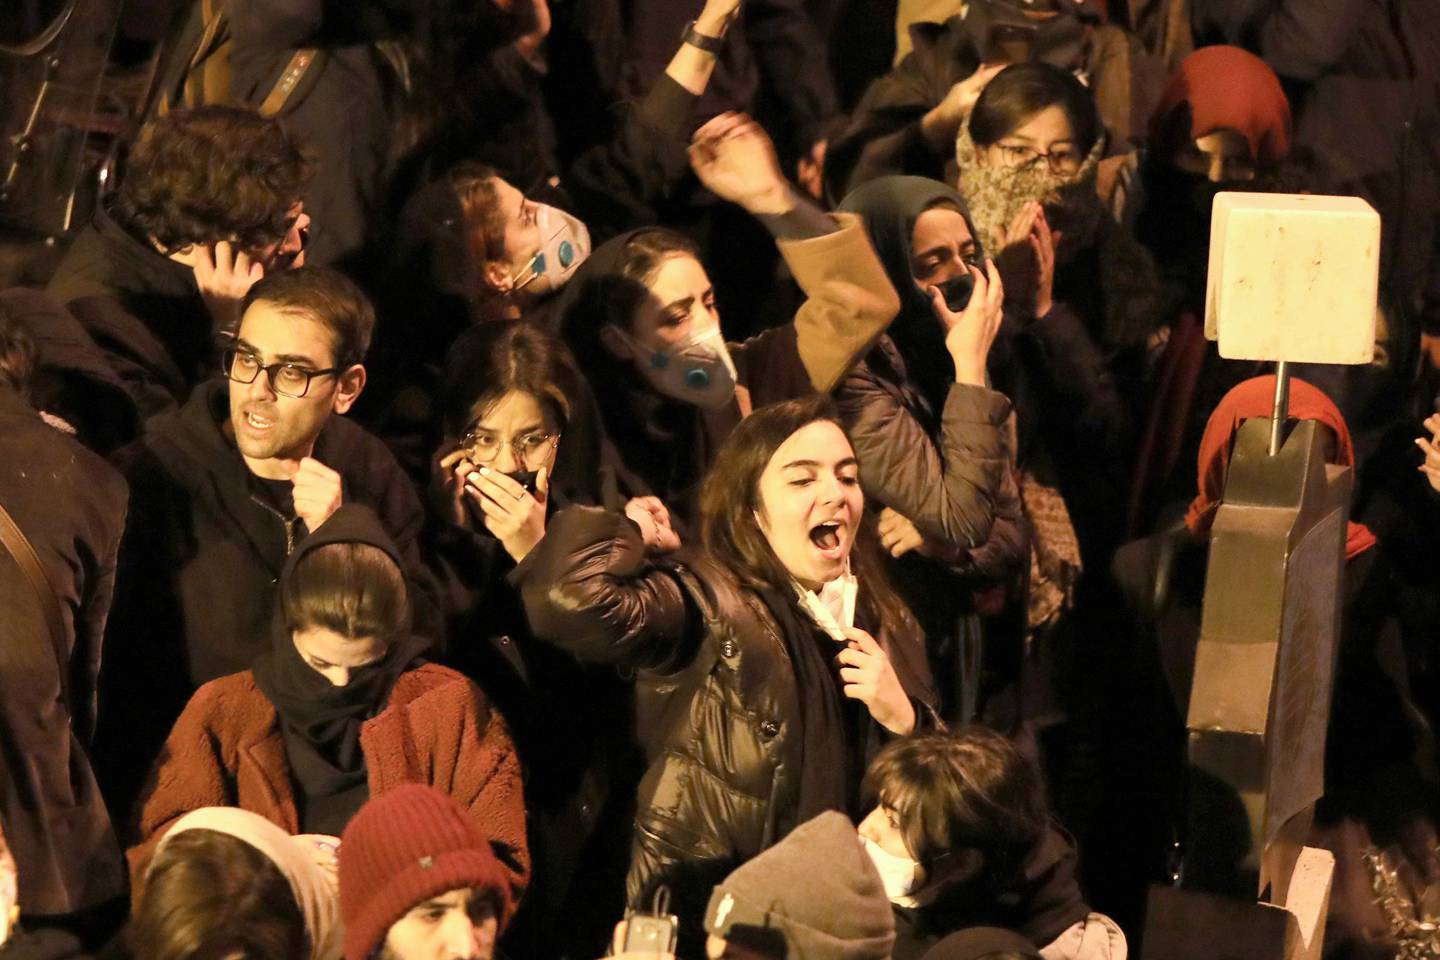 Iranians students chant slogans as they demonstrate following a tribute for the victims of Ukraine International Airlines Boeing 737 in front of the Amirkabir University in the capital Tehran, on January 11, 2020. - Iranian police dispersed students chanting "radical" slogans during a gathering in Tehran to honour the 176 people killed when an airliner was mistakenly shot down, Fars news agency reported. AFP correspondents said hundreds of students had gathered early in the evening at Amir Kabir University, in downtown Tehran, to pay respects to those killed in the air disaster. (Photo by ATTA KENARE / AFP)